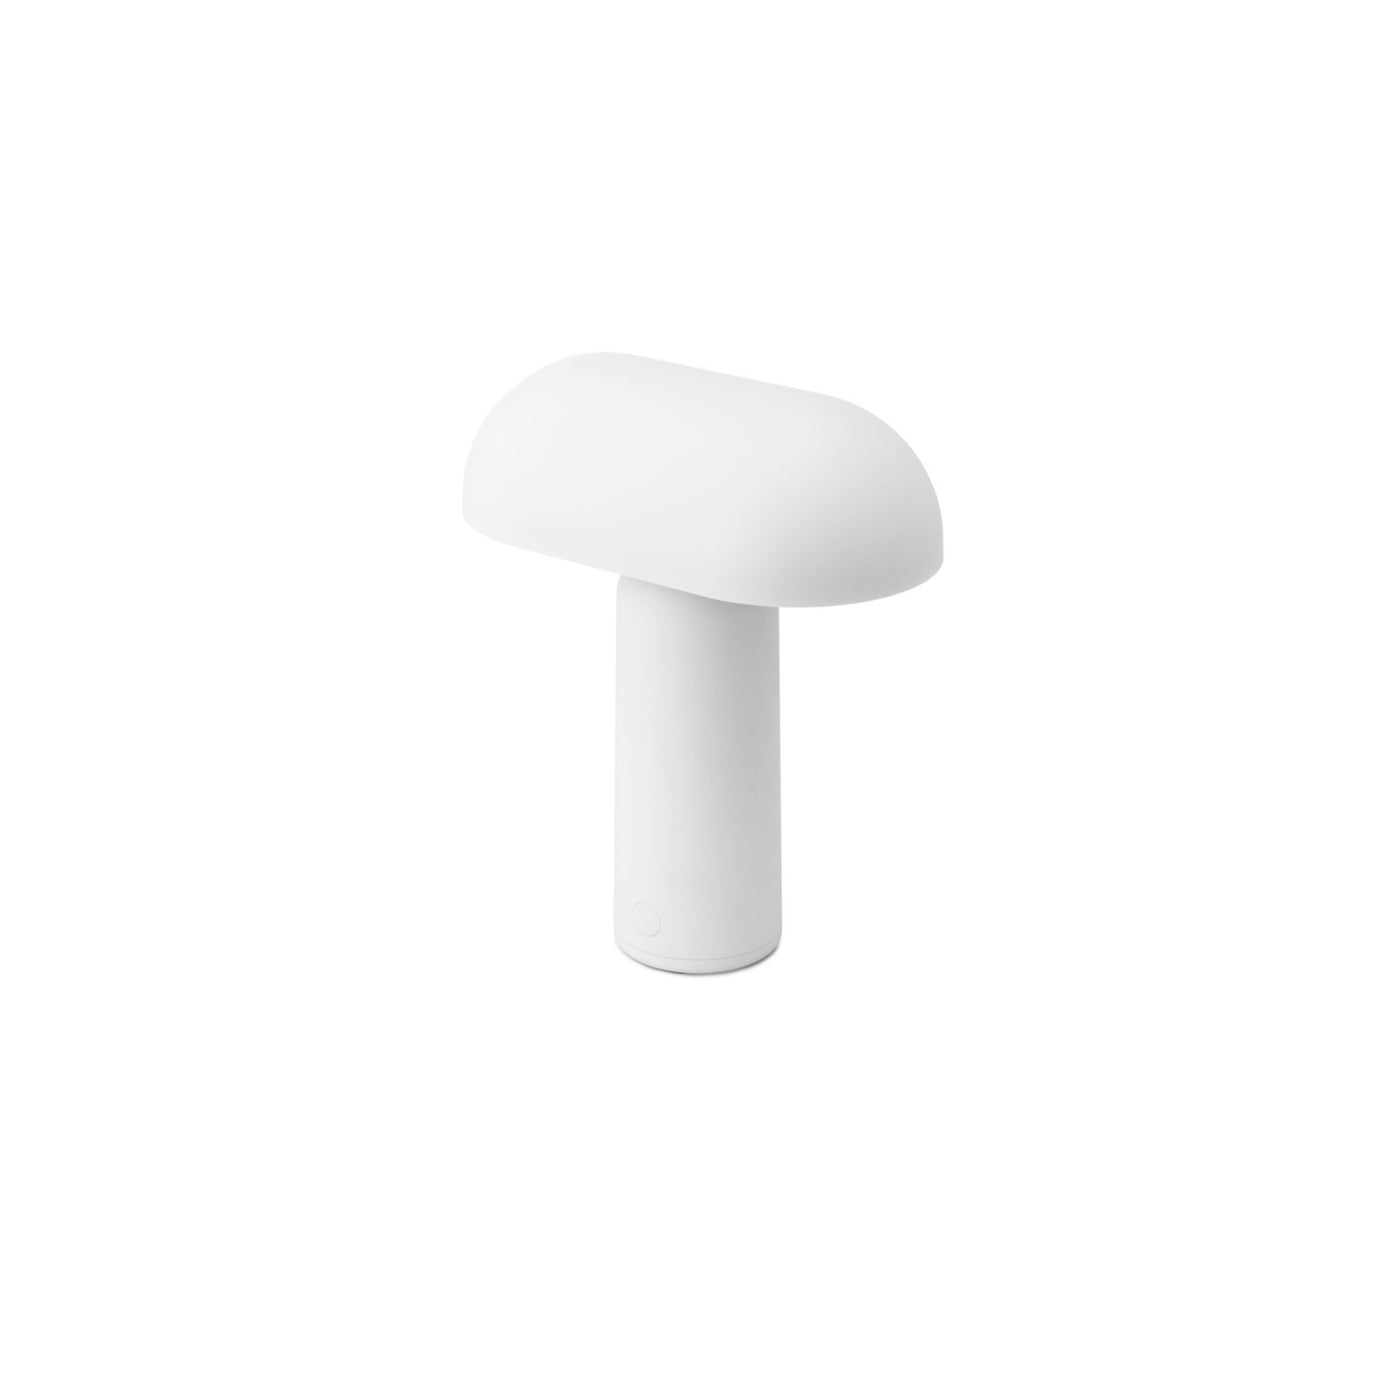 Normann Copenhagen Porta Table Lamp. Free UK delivery from someday designs. #colour_white